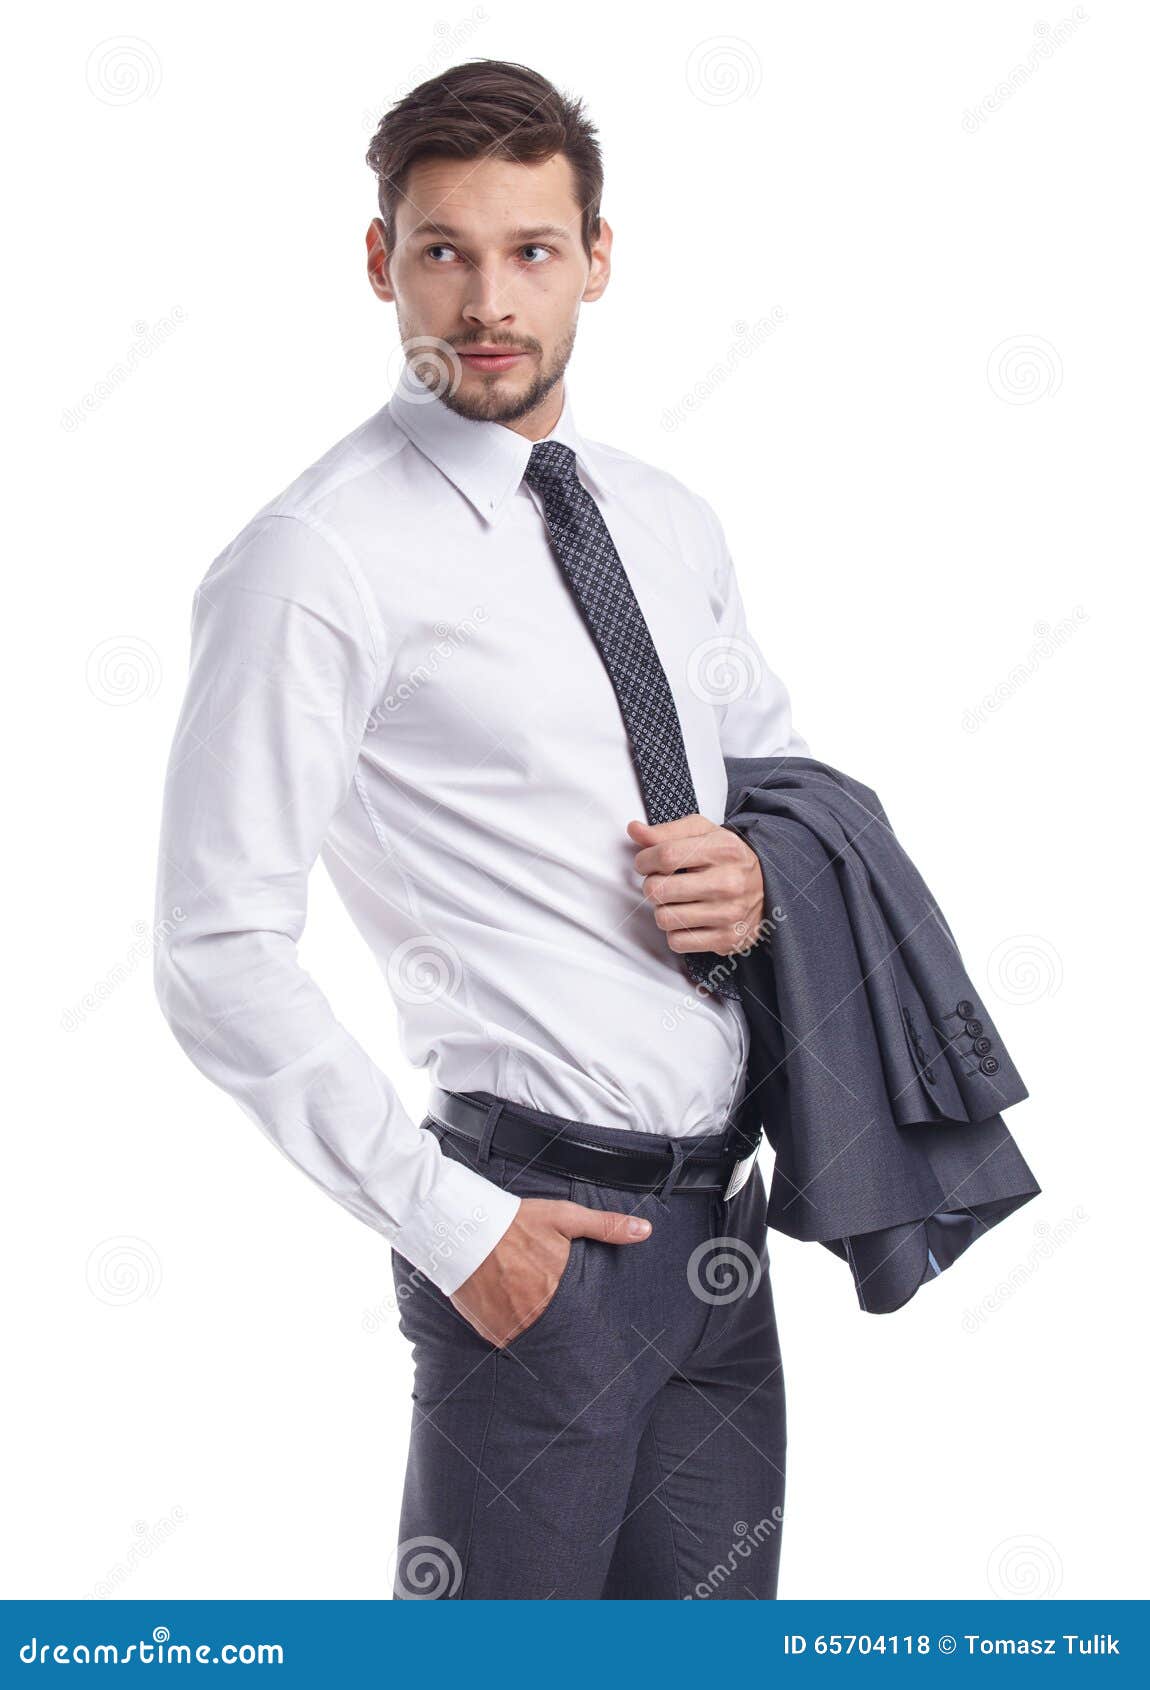 Smiling Businessman Looking at Camera Stock Photo - Image of handsome ...